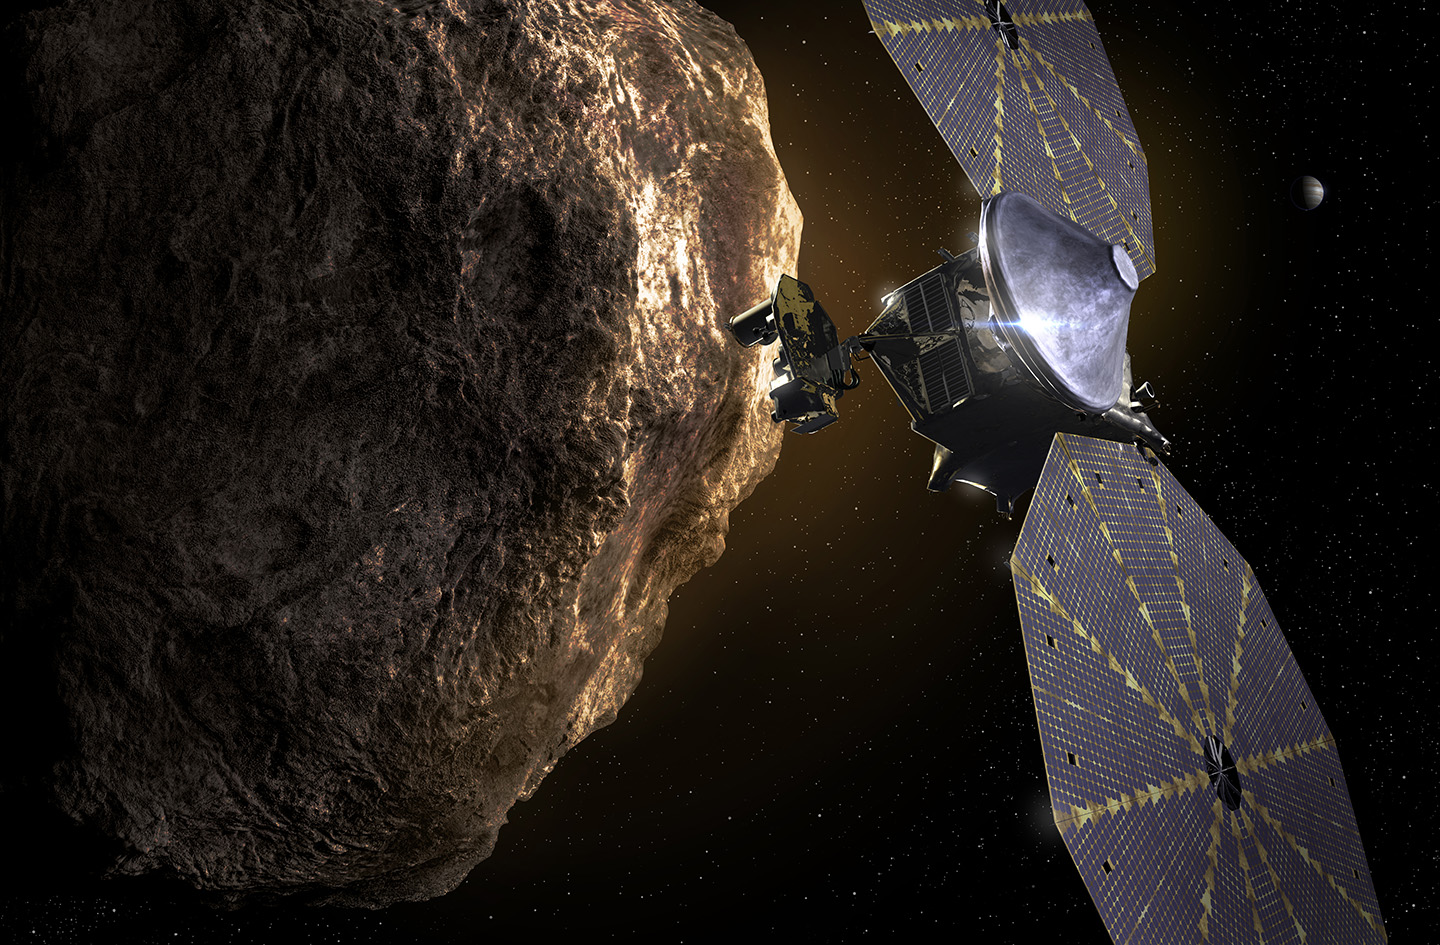 Houston We Have a Podcast: Ep. 289: Lucy The Lucy spacecraft passes one of the Trojan Asteroids near Jupiter. Credit: Southwest Research Institute